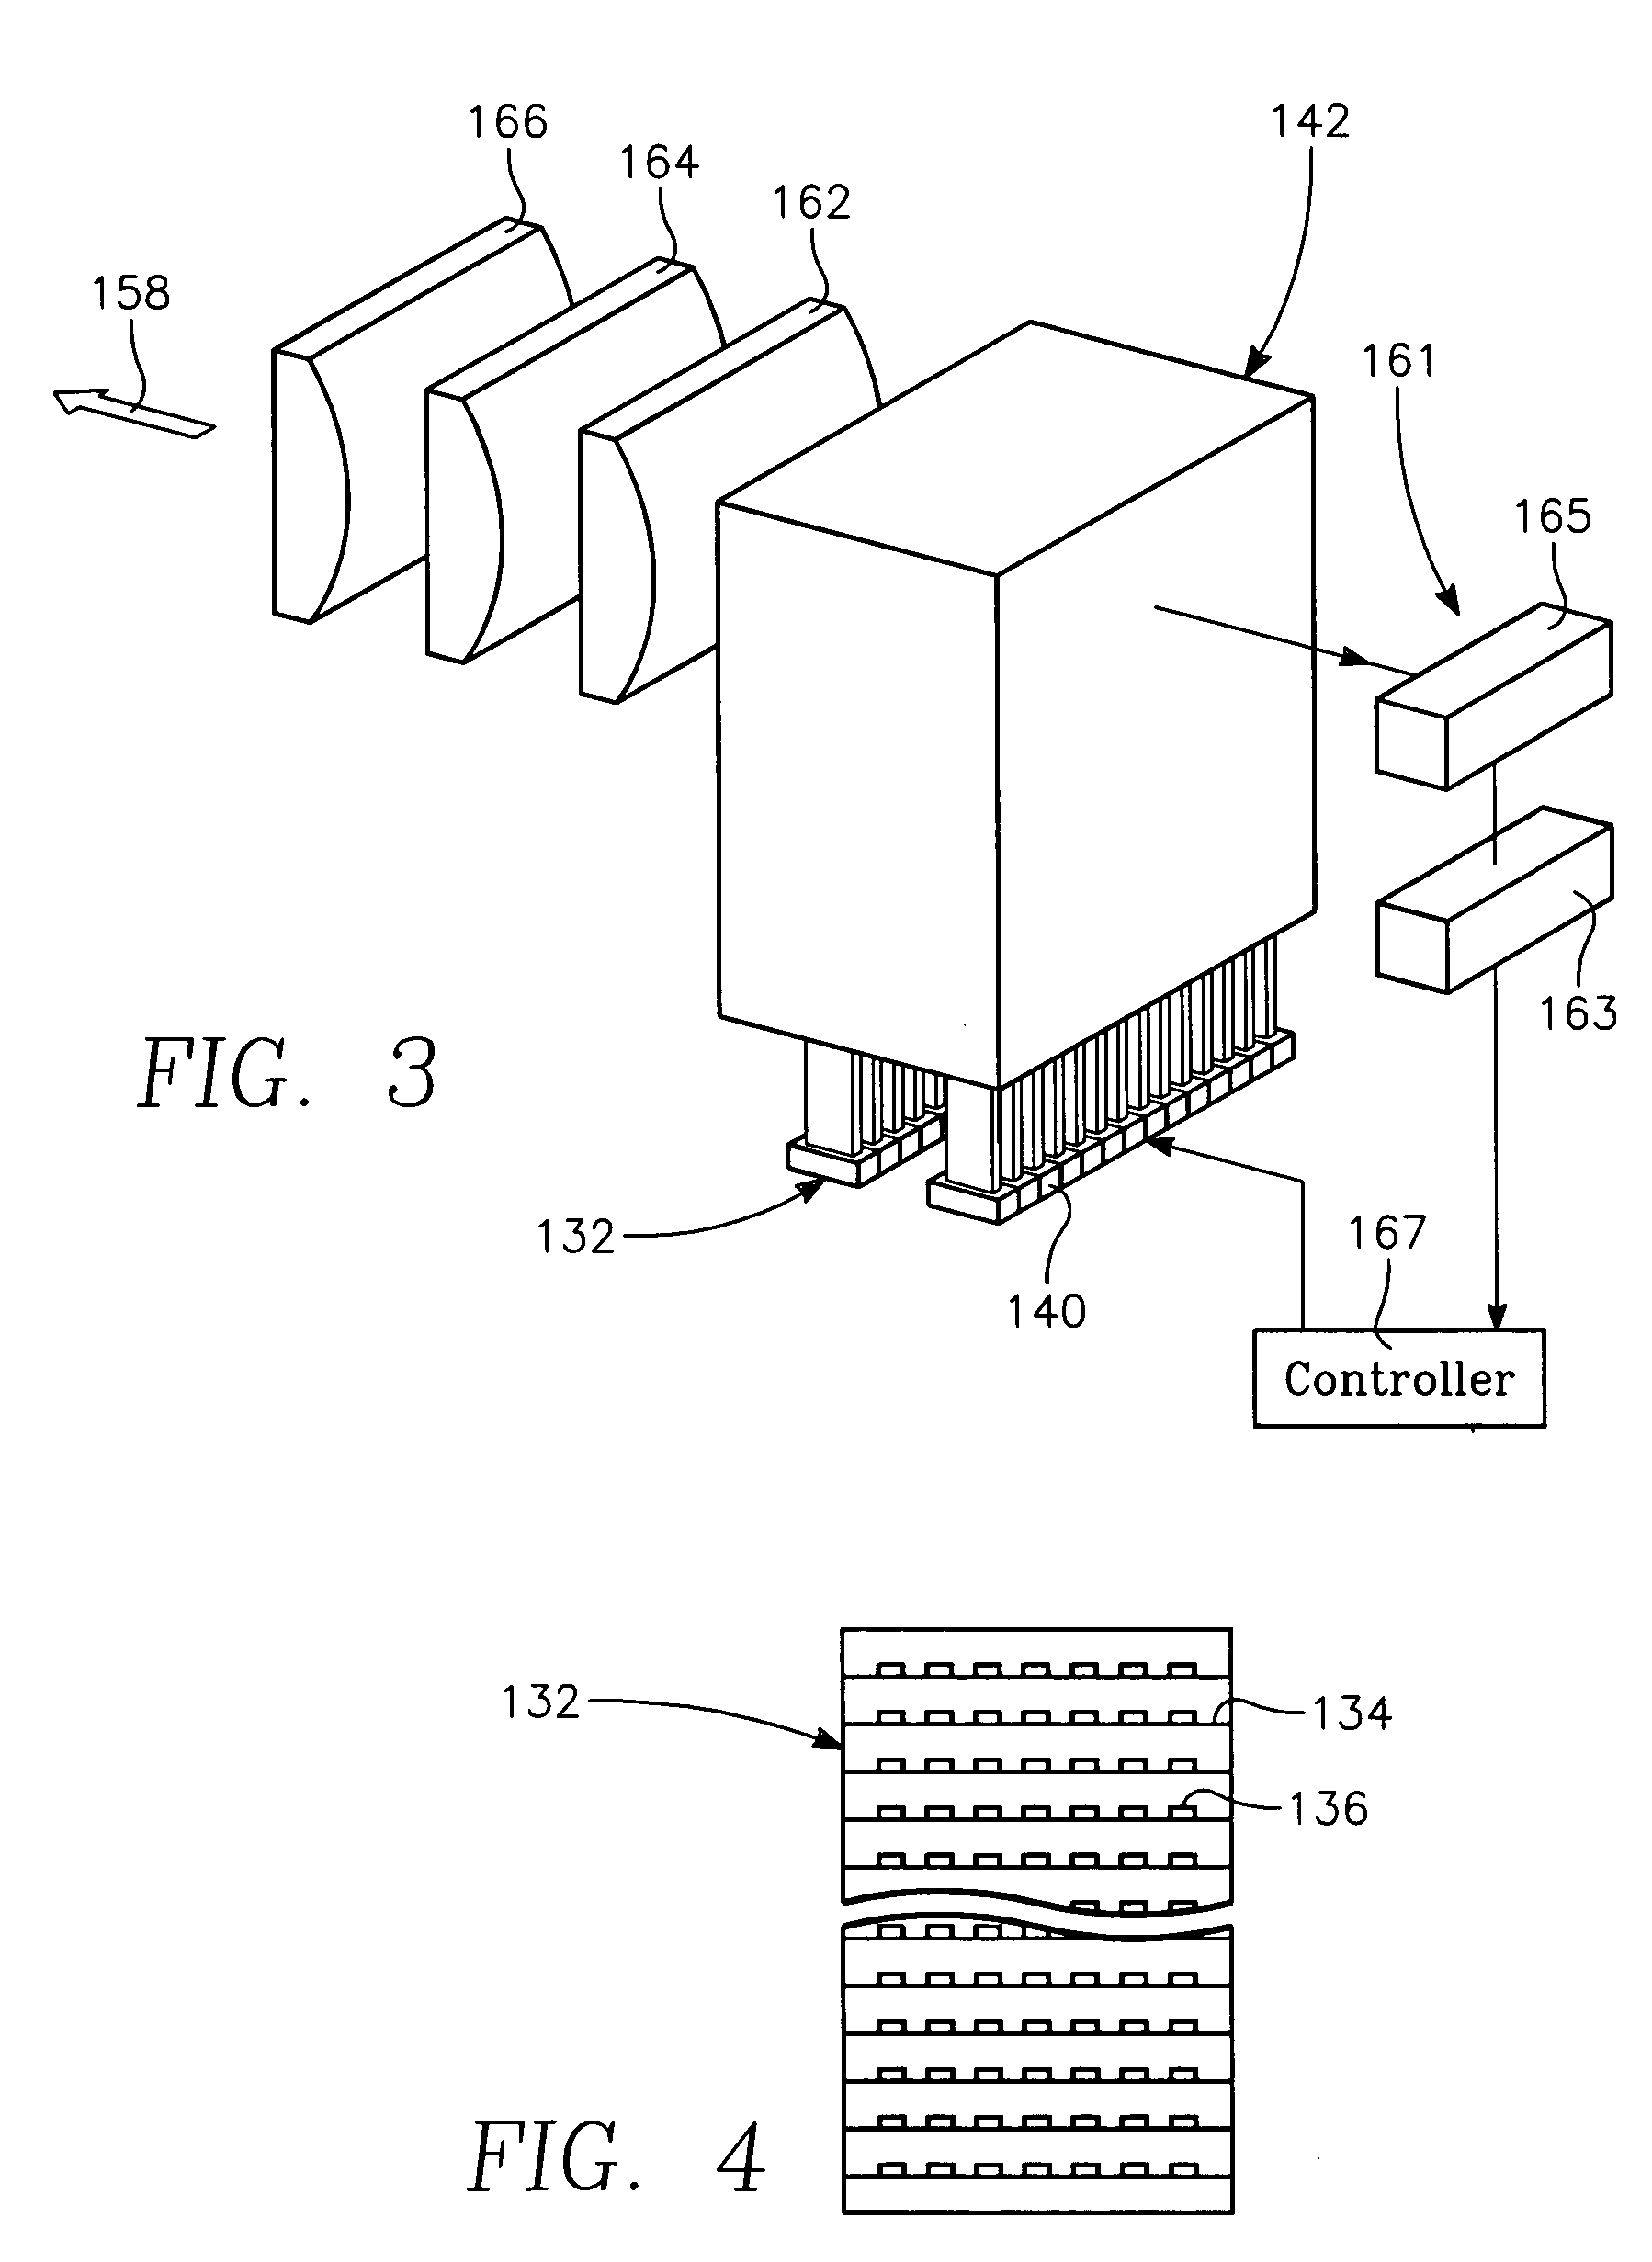 Low temperature plasma deposition process for carbon layer deposition